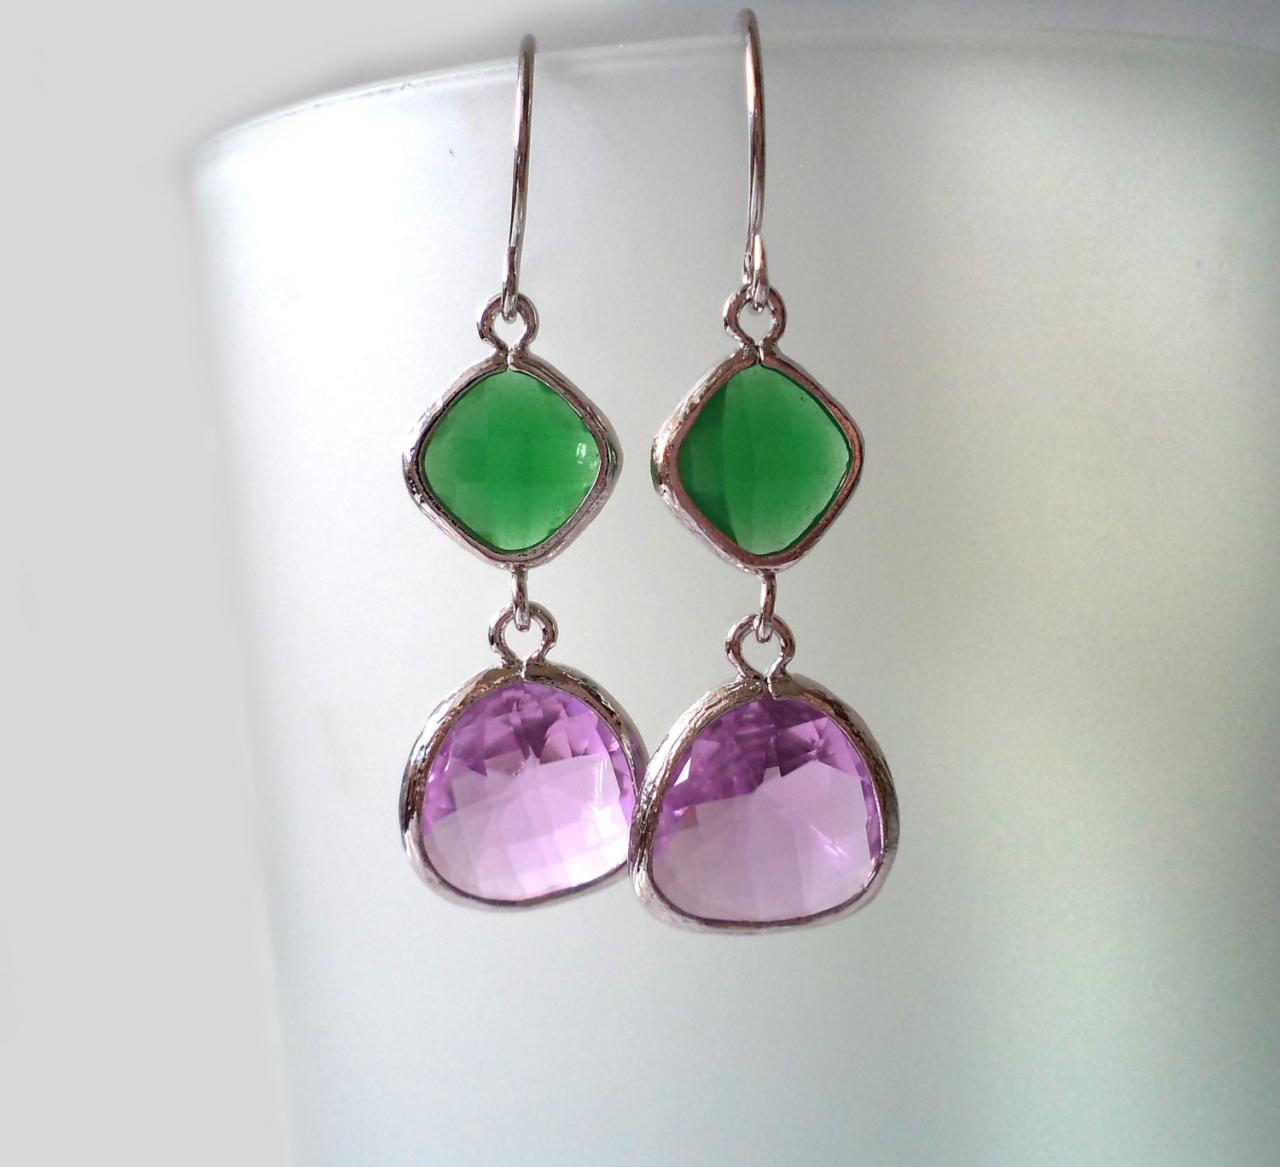 Green Onyx And Lilac Crystal Earrings. Purple And Green Dangles. Green And Lavender Chandeliers. Bridal, Bridesmaids Gifts.